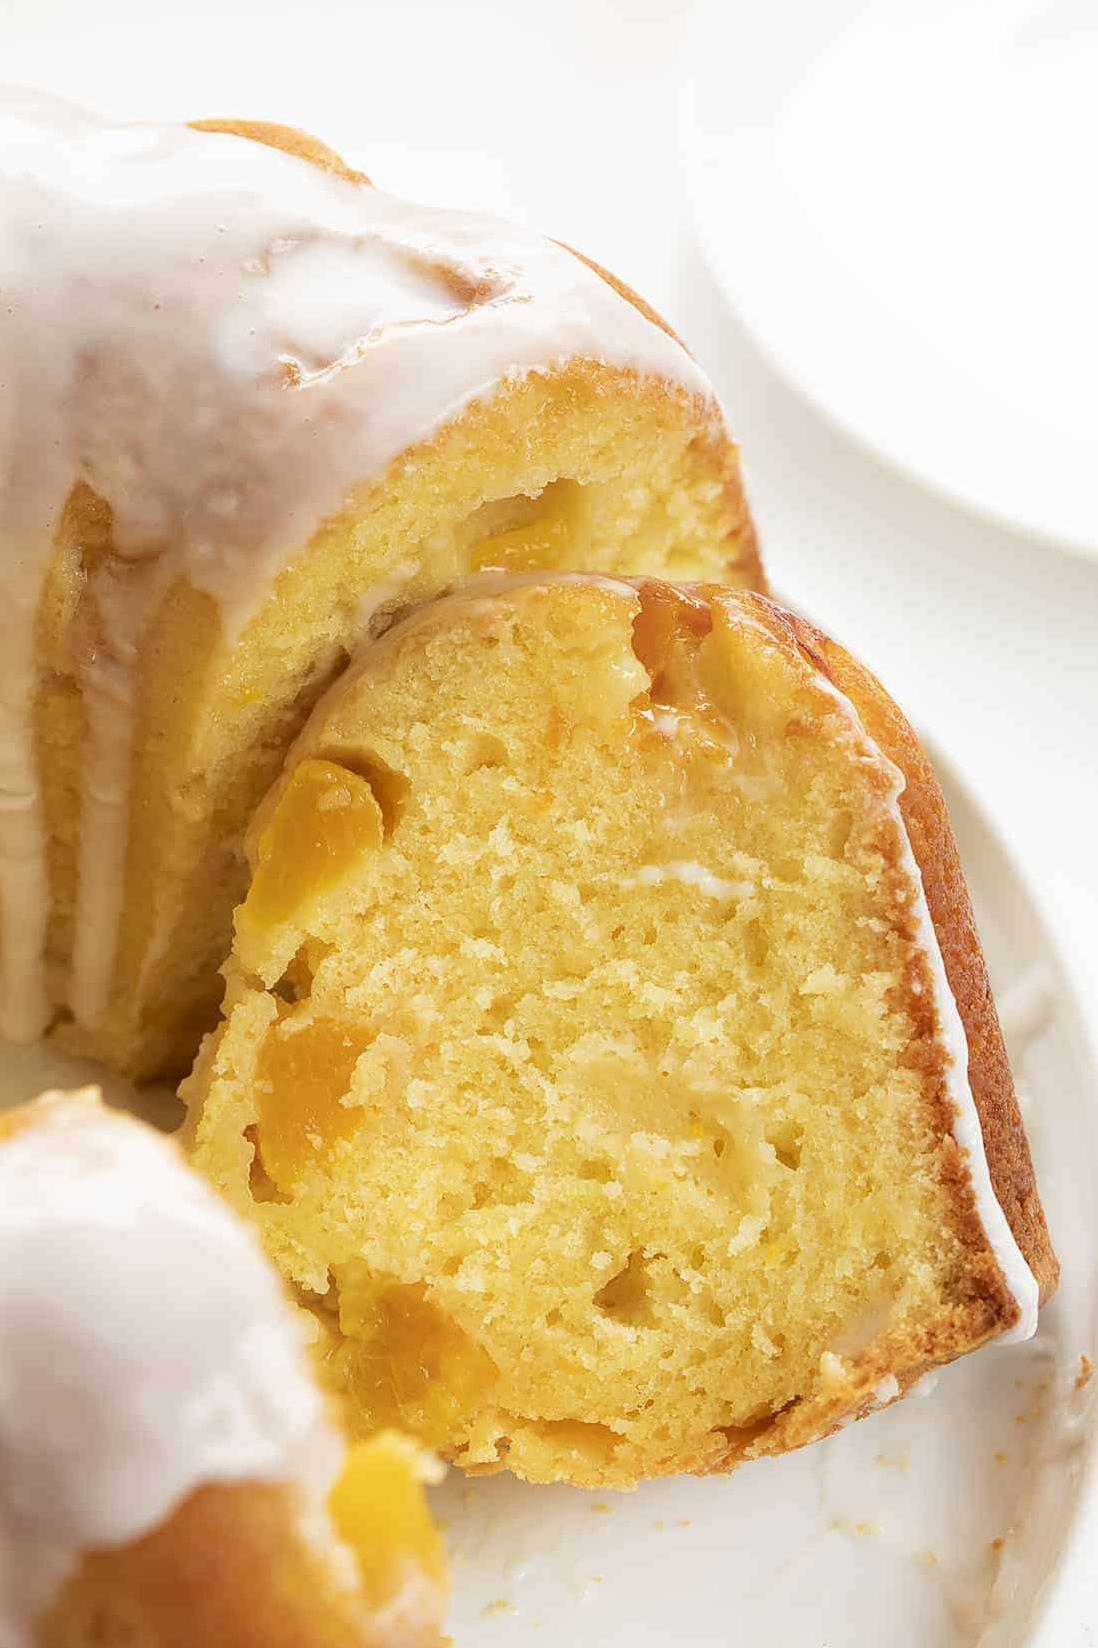  Bite into the warm, buttery cake for a comforting treat.